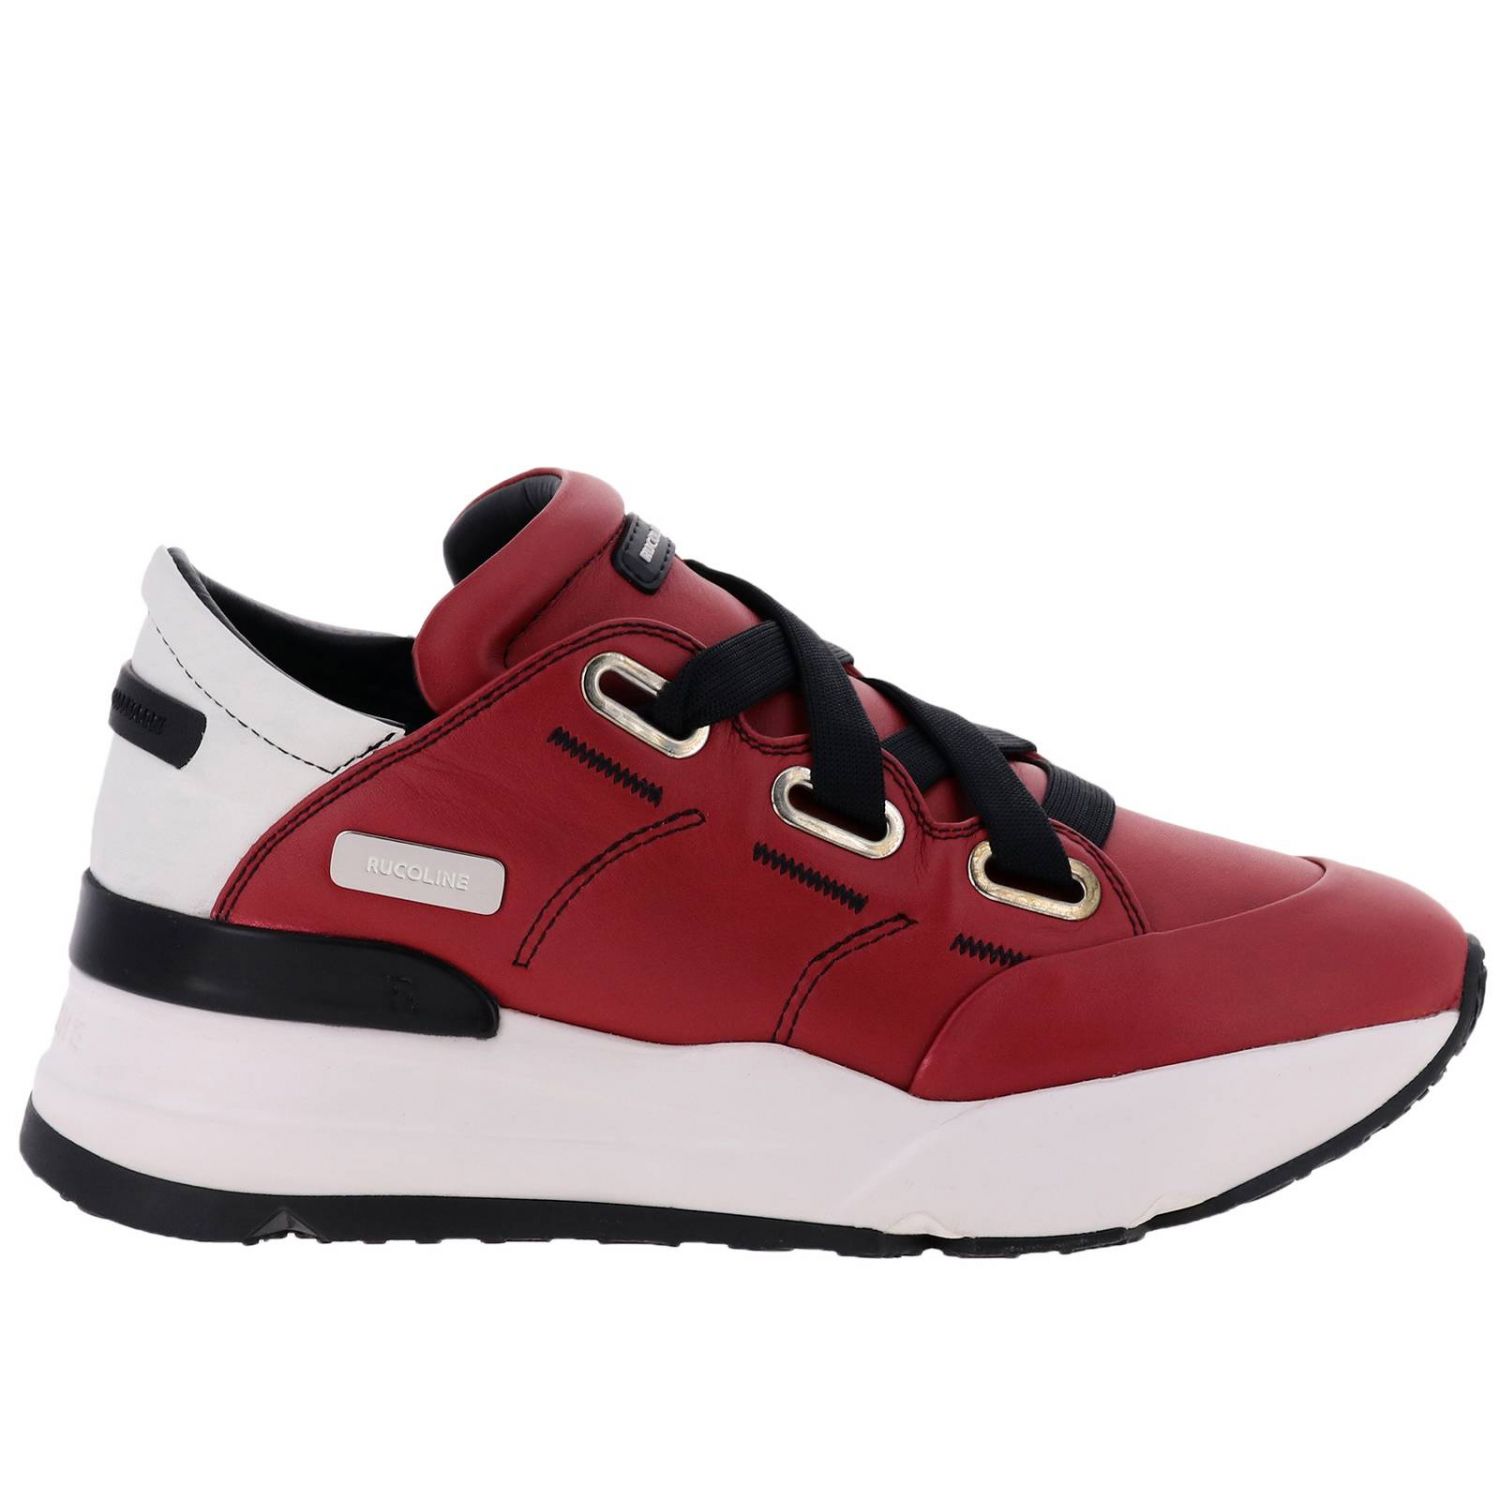 RUCOLINE: Sneakers women | Sneakers Rucoline Women Red | Sneakers ...